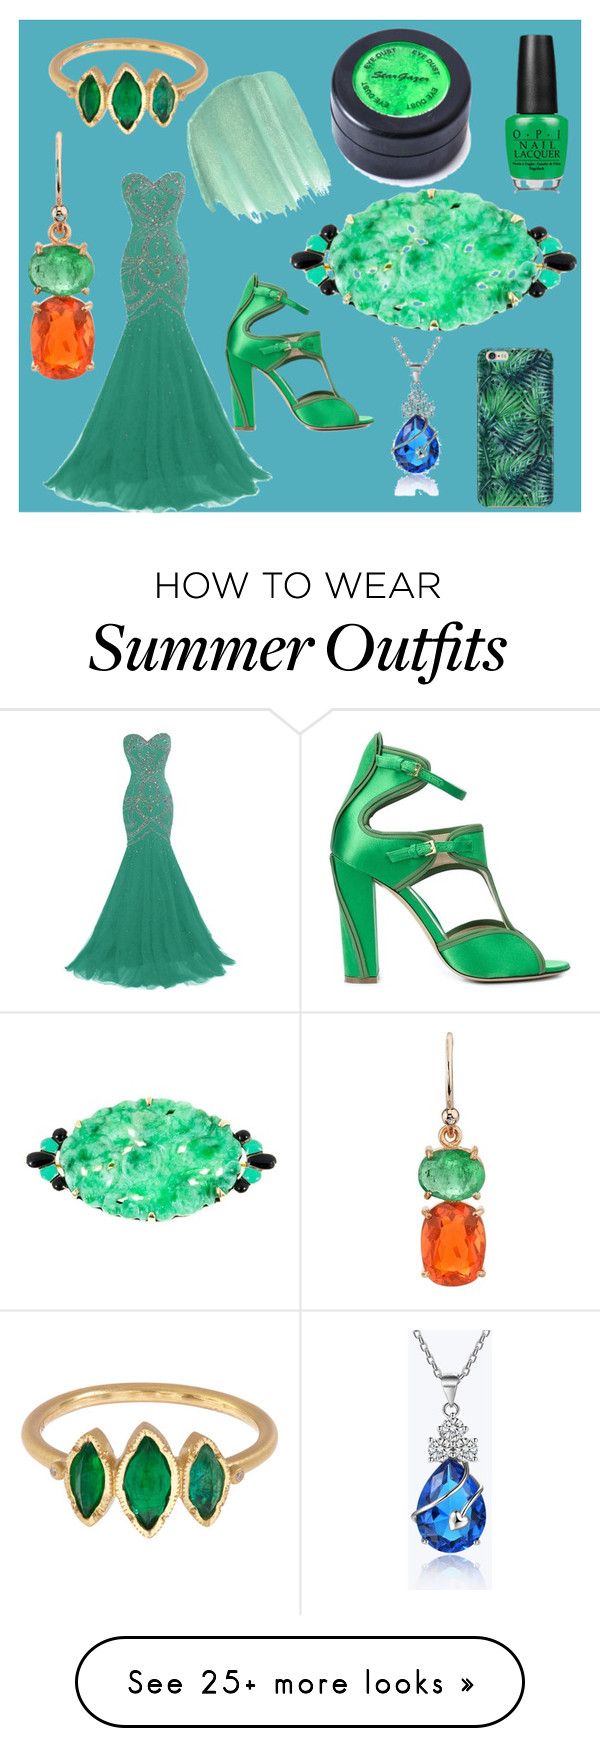 "OC Outfit Challenge - Formal Gala Garb" by winds-daughter on Polyvore...